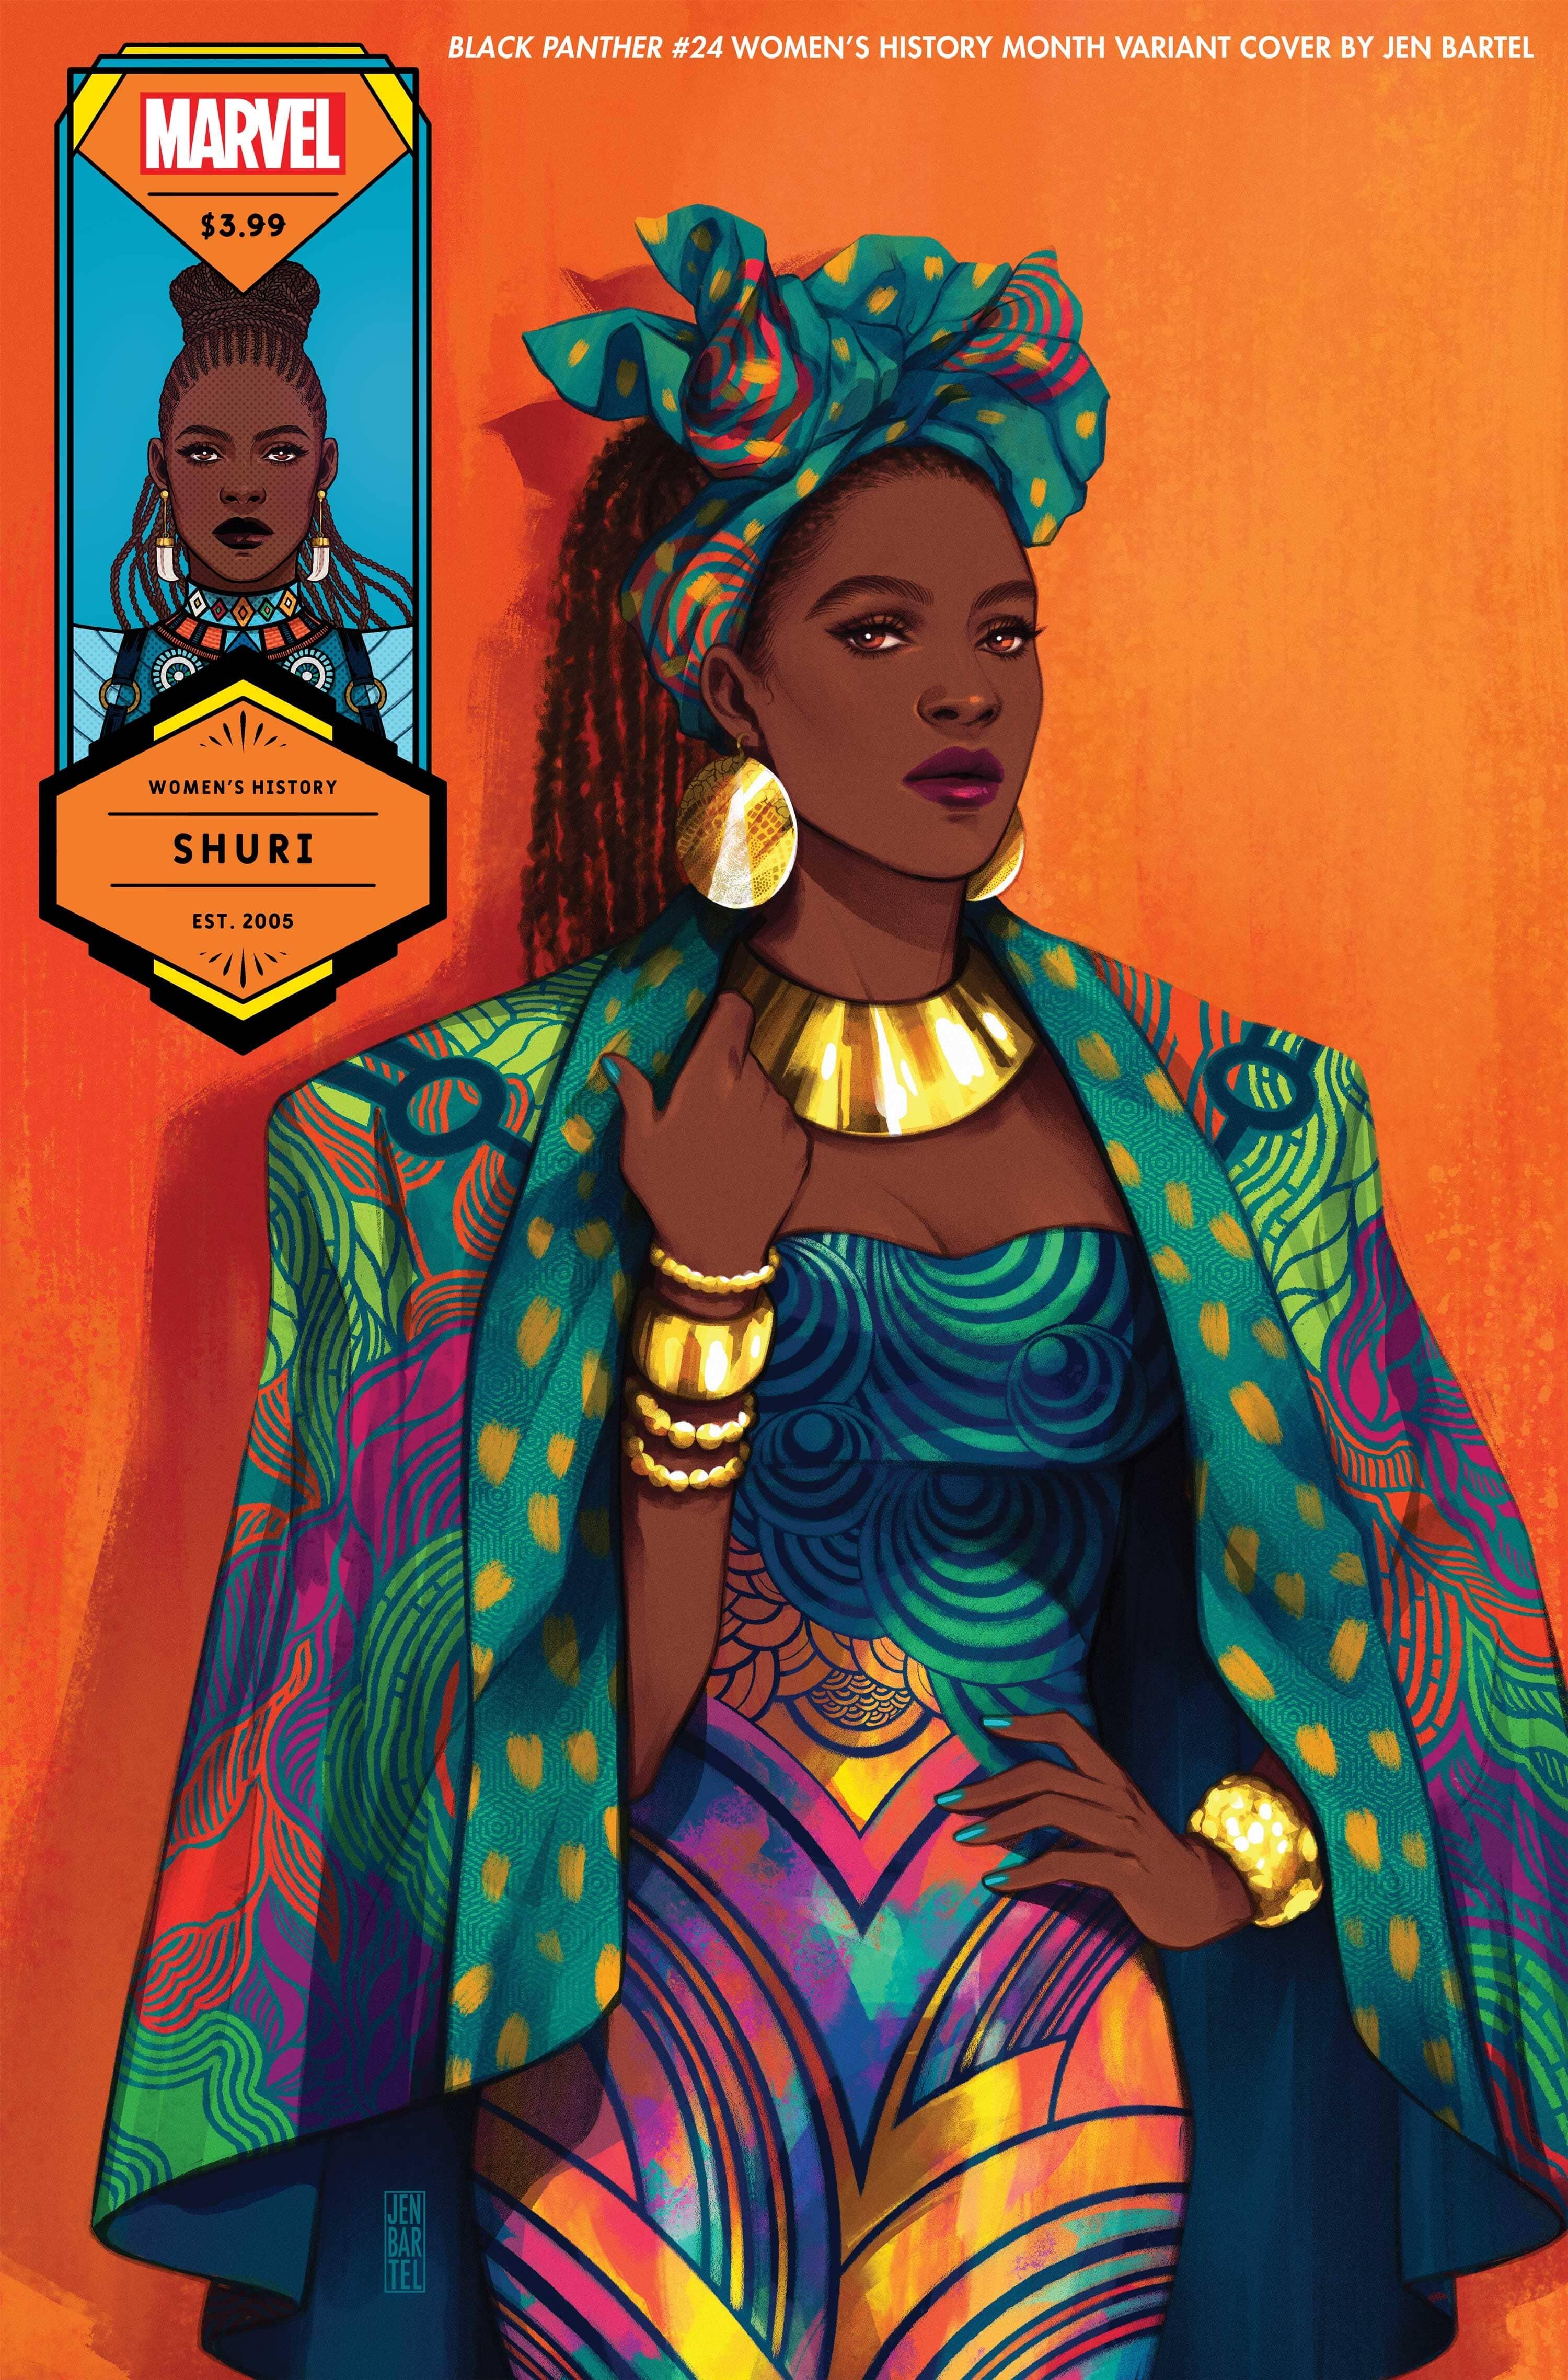 BlackPanther024_Bartel_Womens-History-Month_variant